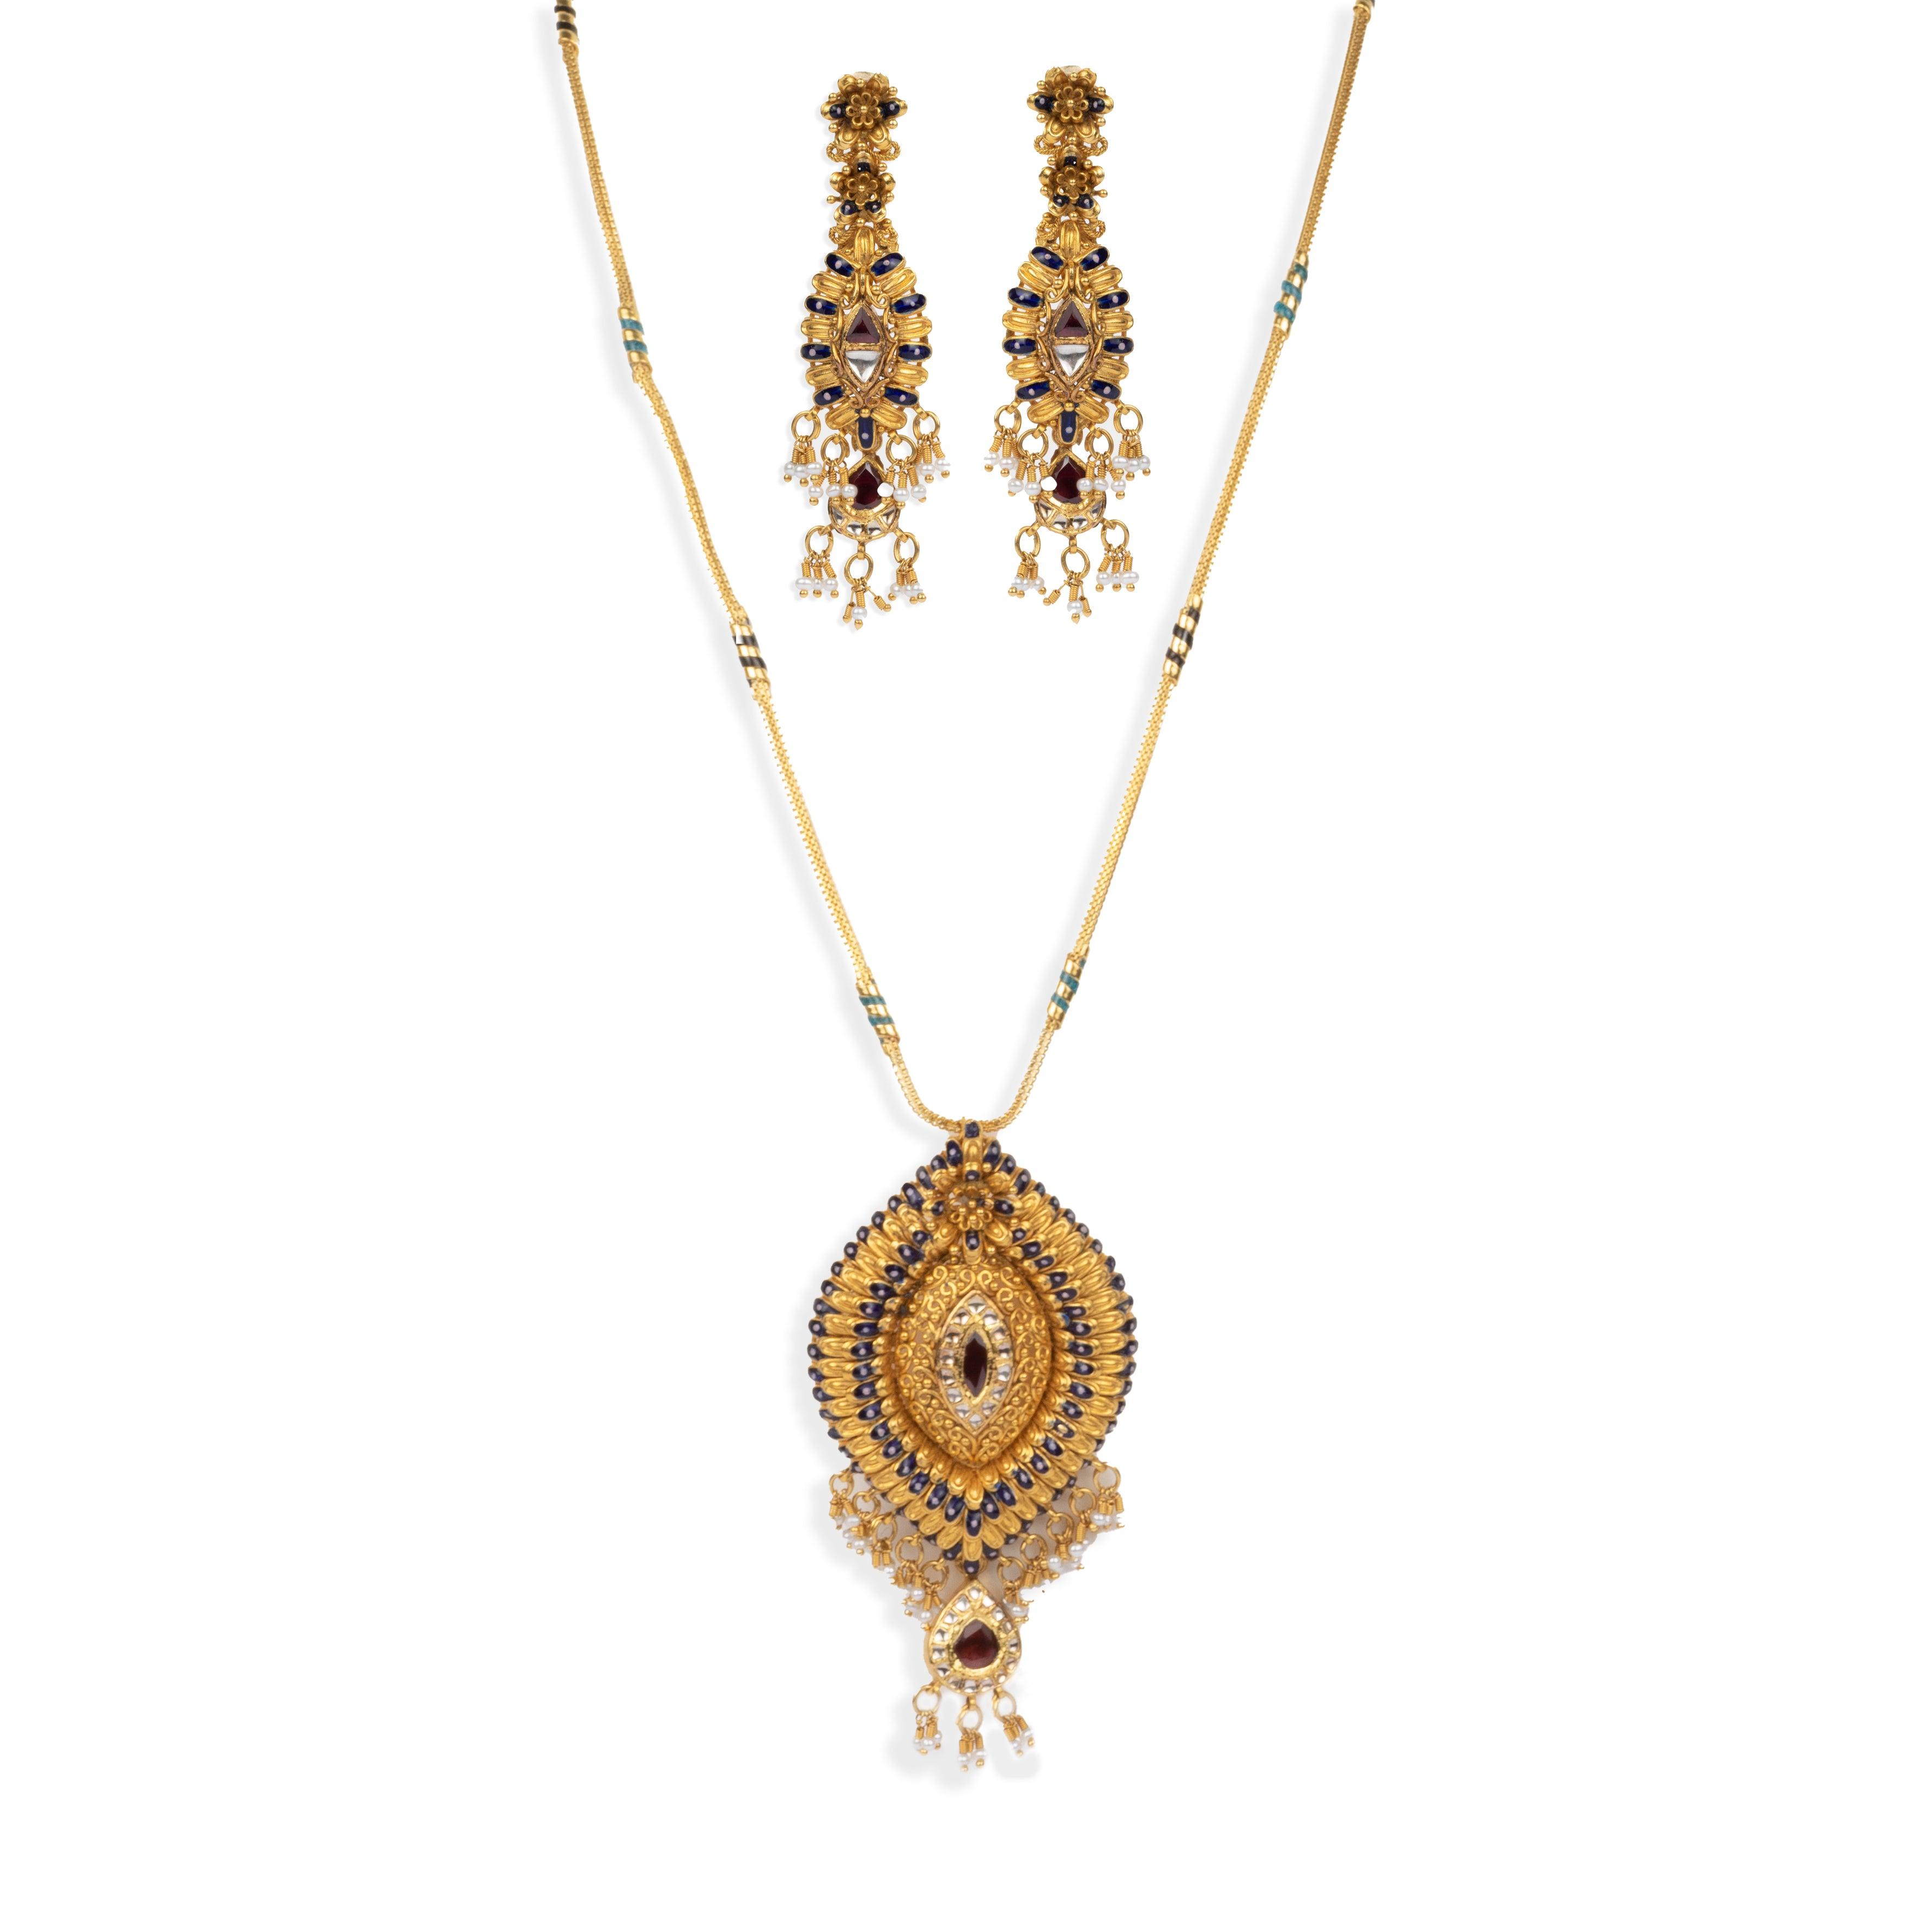 22ct Gold Antiquated Look Necklace and Earrings set with Cubic Zirconia stones (52.8g) N&E-4984 - Minar Jewellers